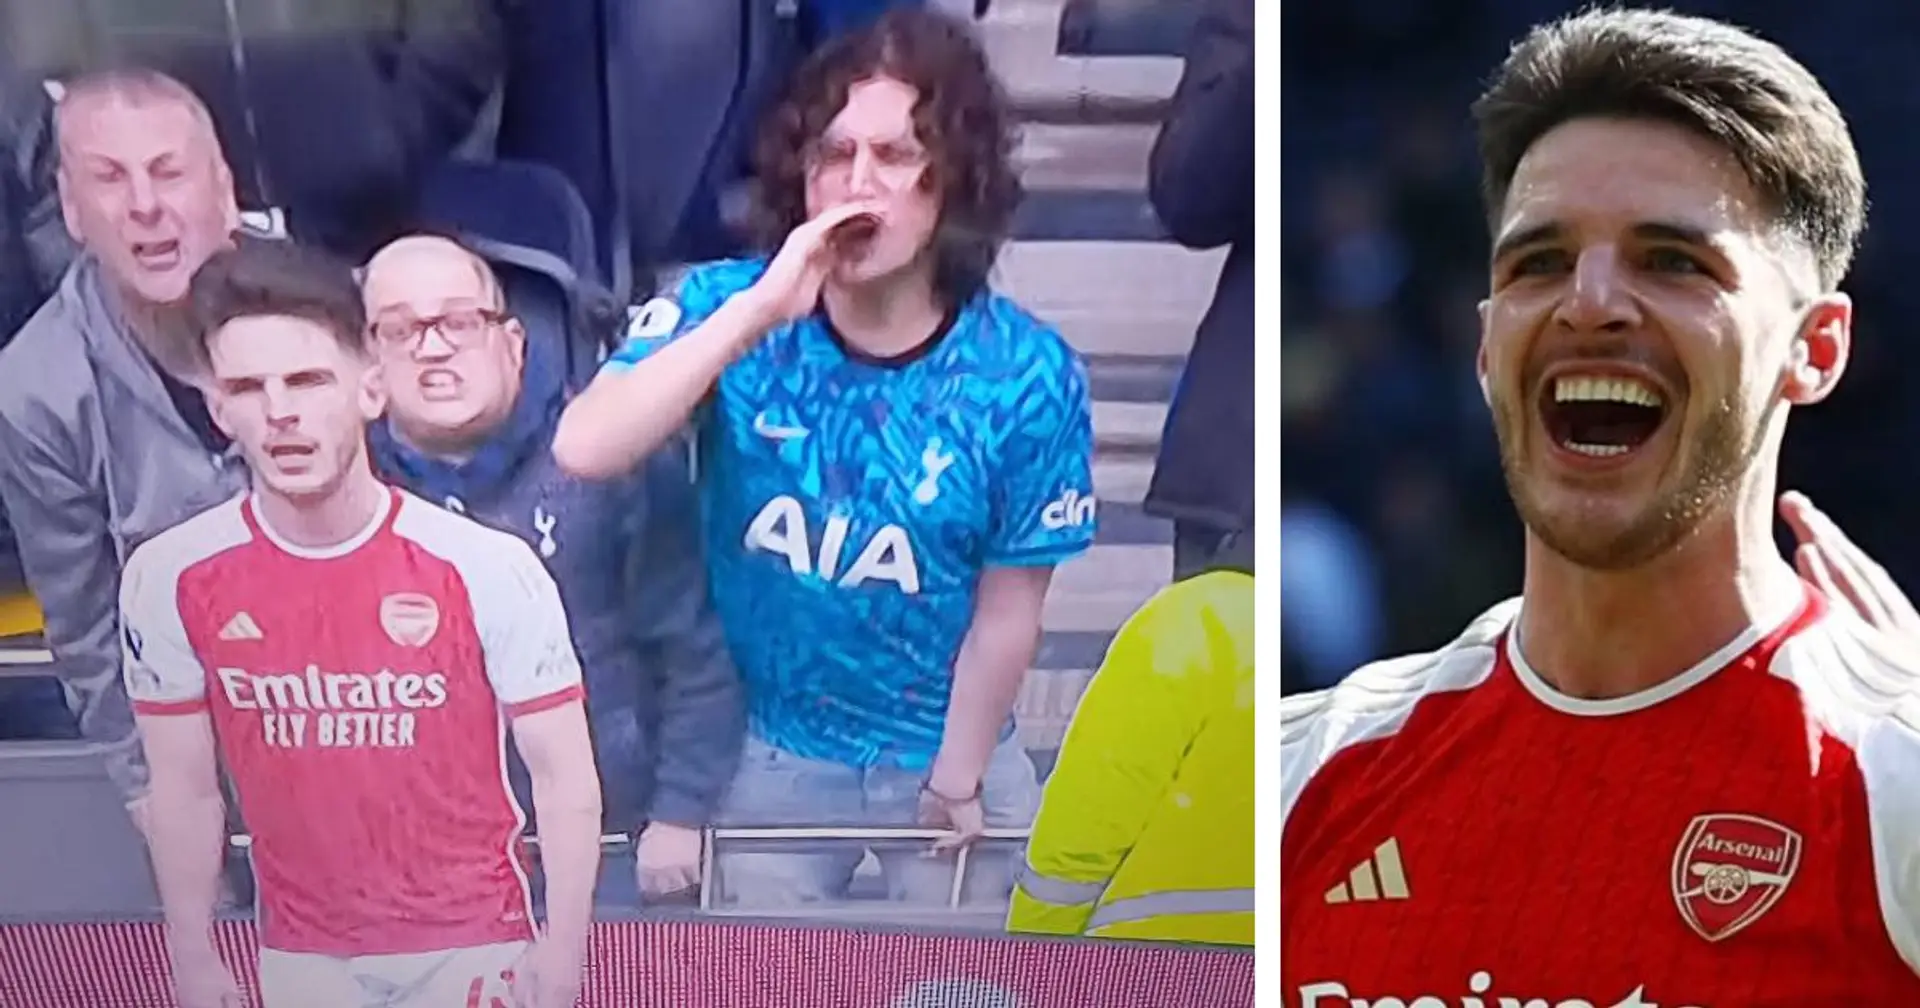 Spurs fan goes viral for heckling Rice during corner — Arsenal score seconds later